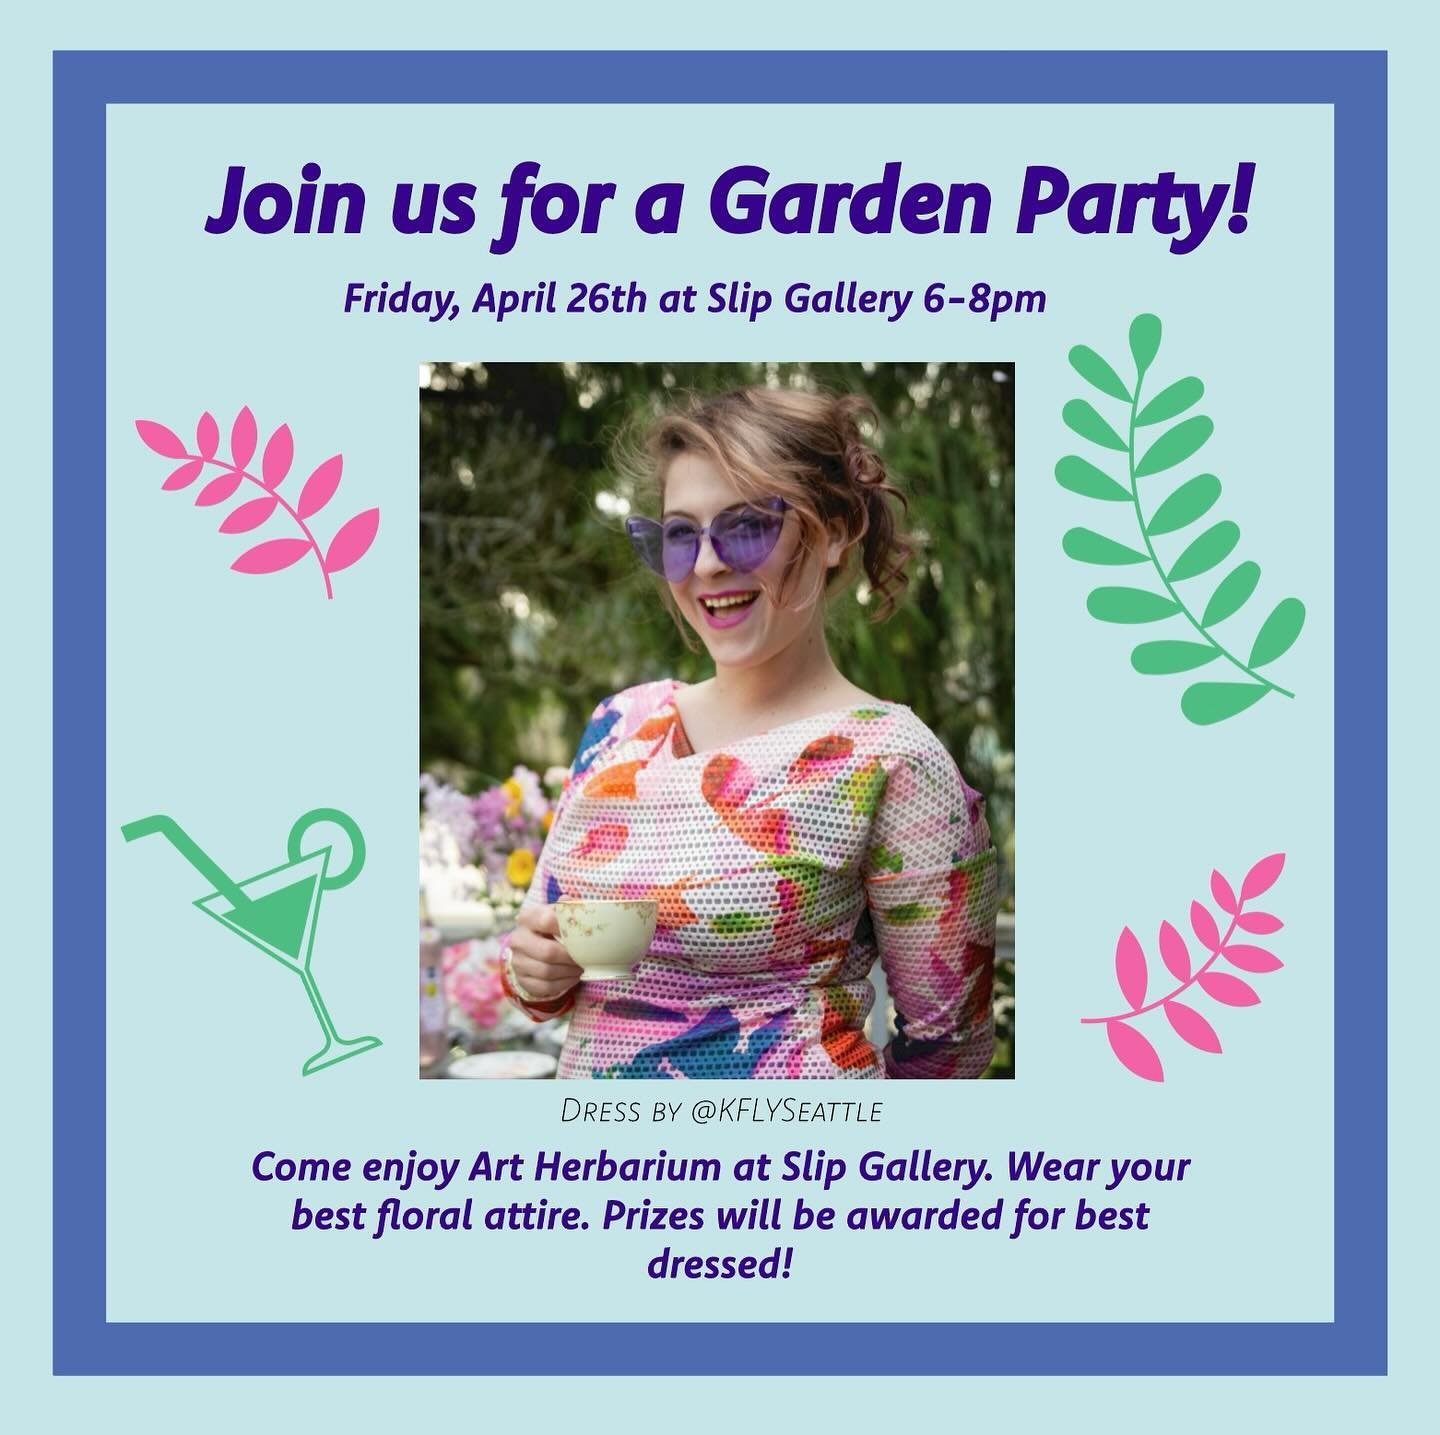 Join us for a garden party! Wear your best floral garb and maybe win a prize! There will be music and drinks. Hope to see you there while you visit with the current exhibit, Art Herbarium, featuring Seattle and Portland artists. Plants for sale, too,